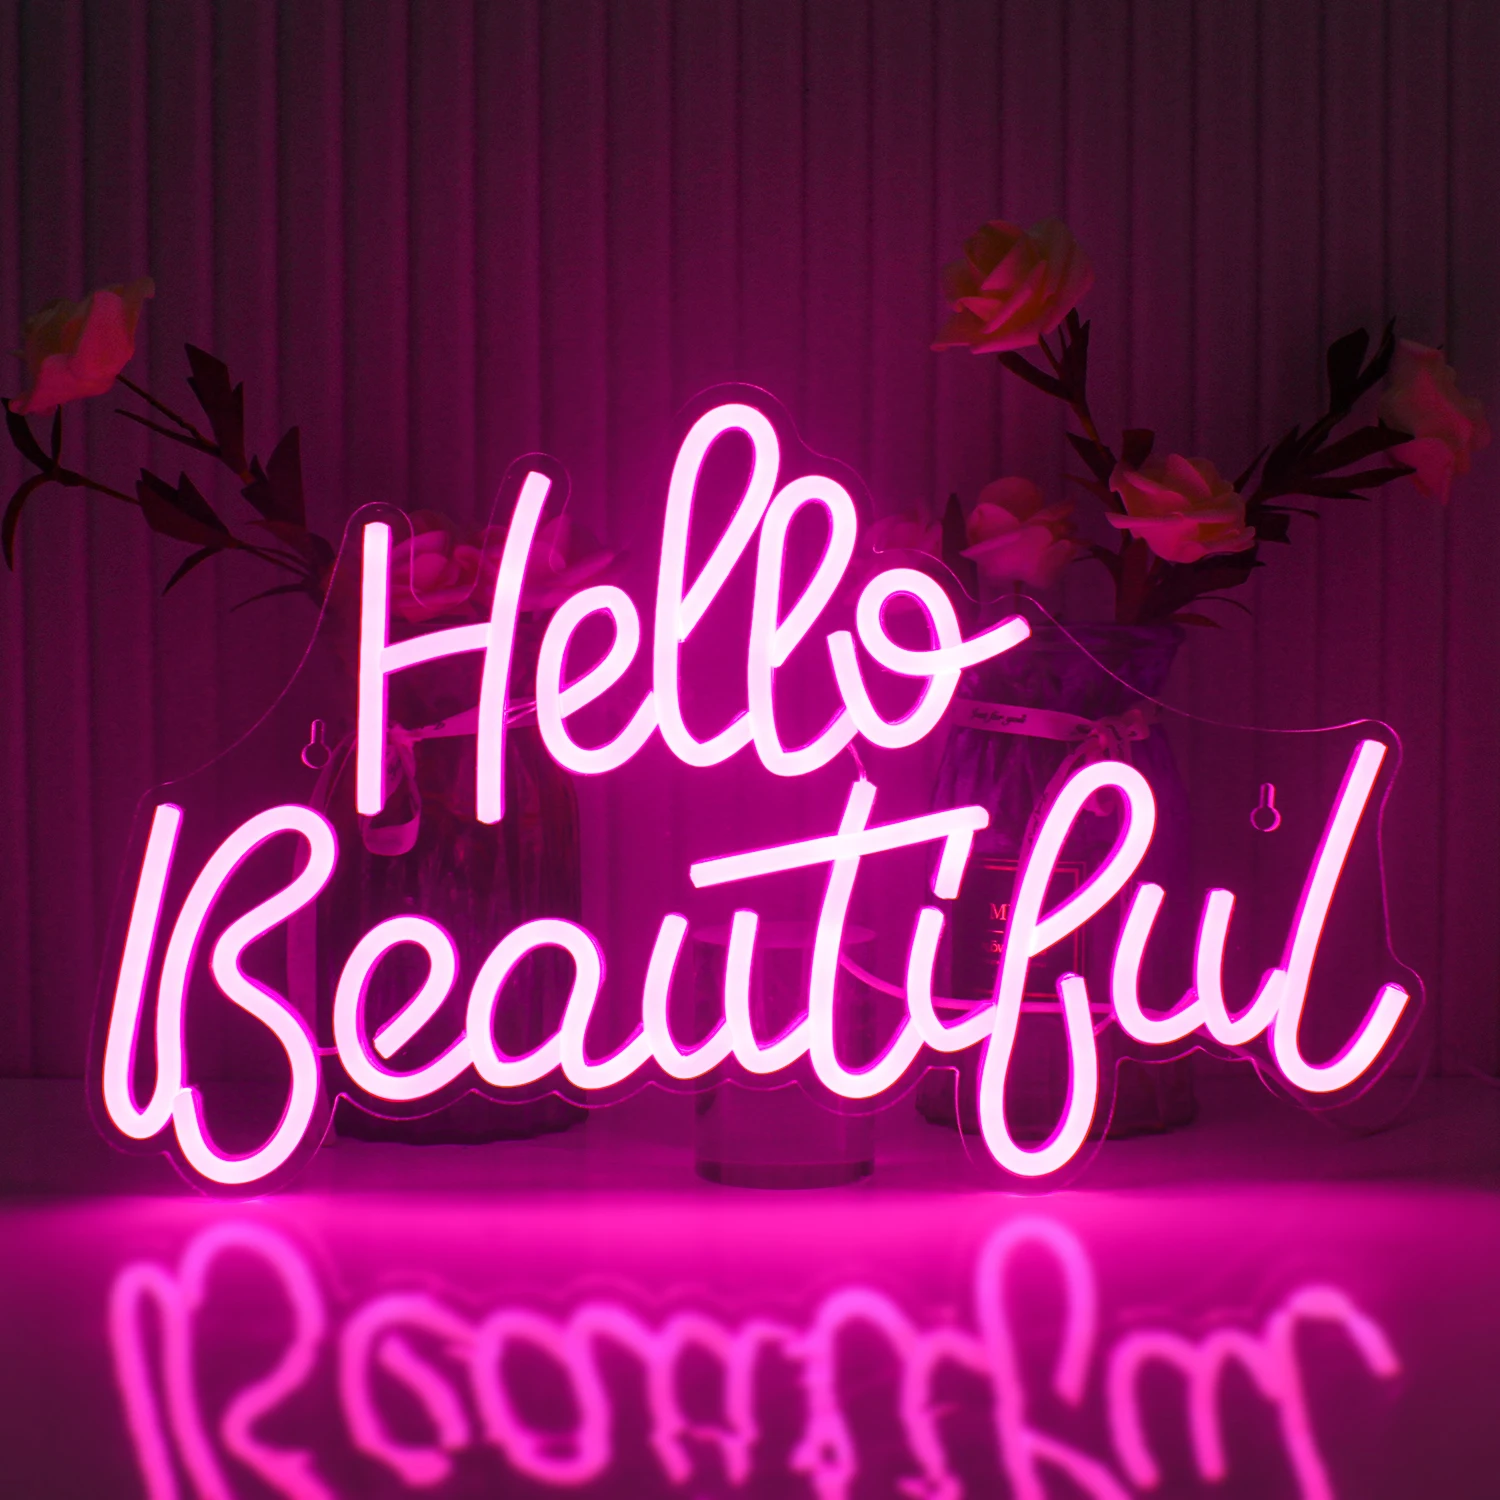 

Hello Beautiful LED Custom Made Neon Sign Light USB Powered Home House Wall Art Wedding Party Festival Proposal Room Decor Gift